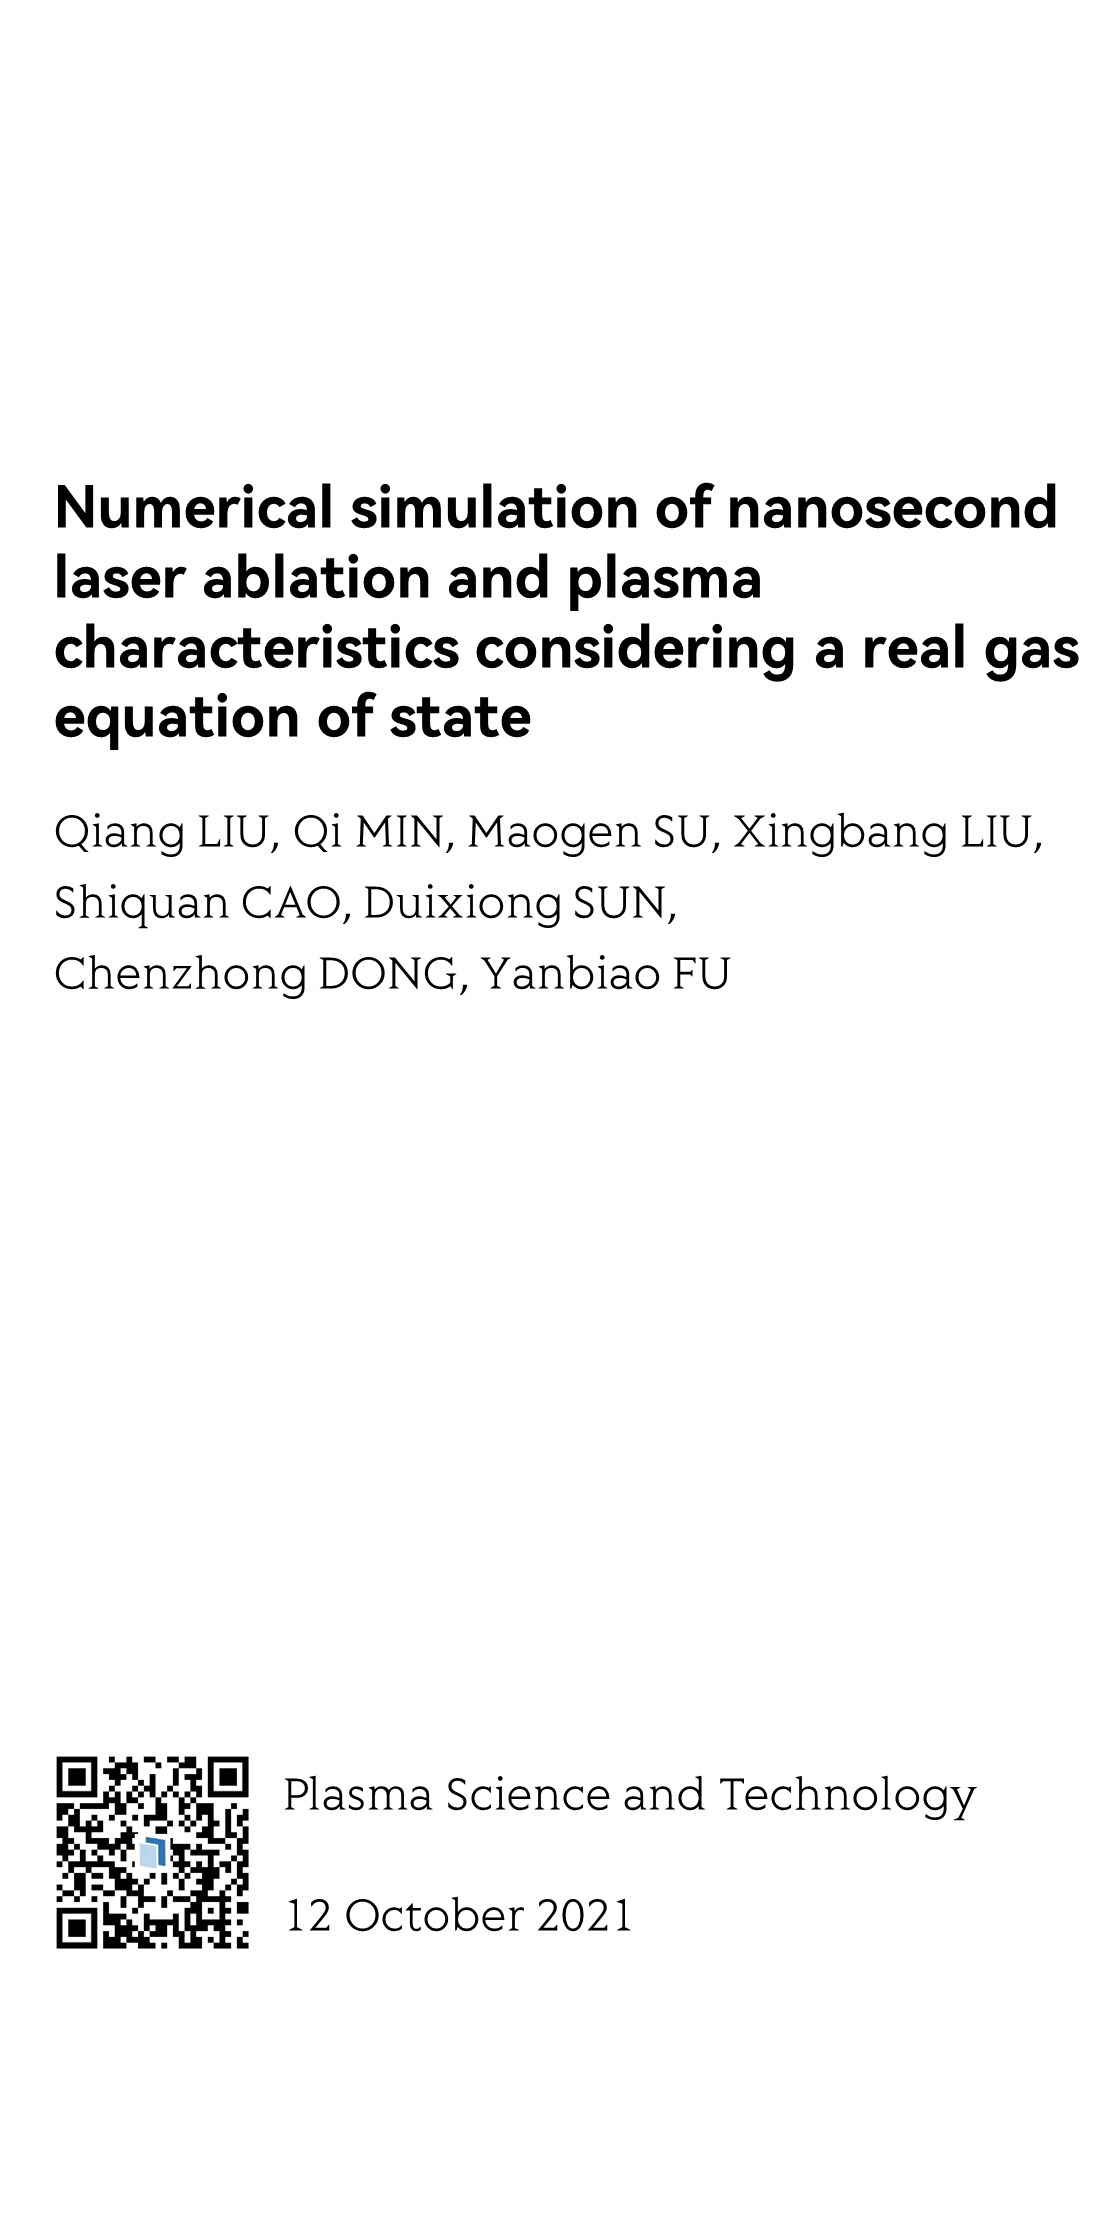 Numerical simulation of nanosecond laser ablation and plasma characteristics considering a real gas equation of state_1